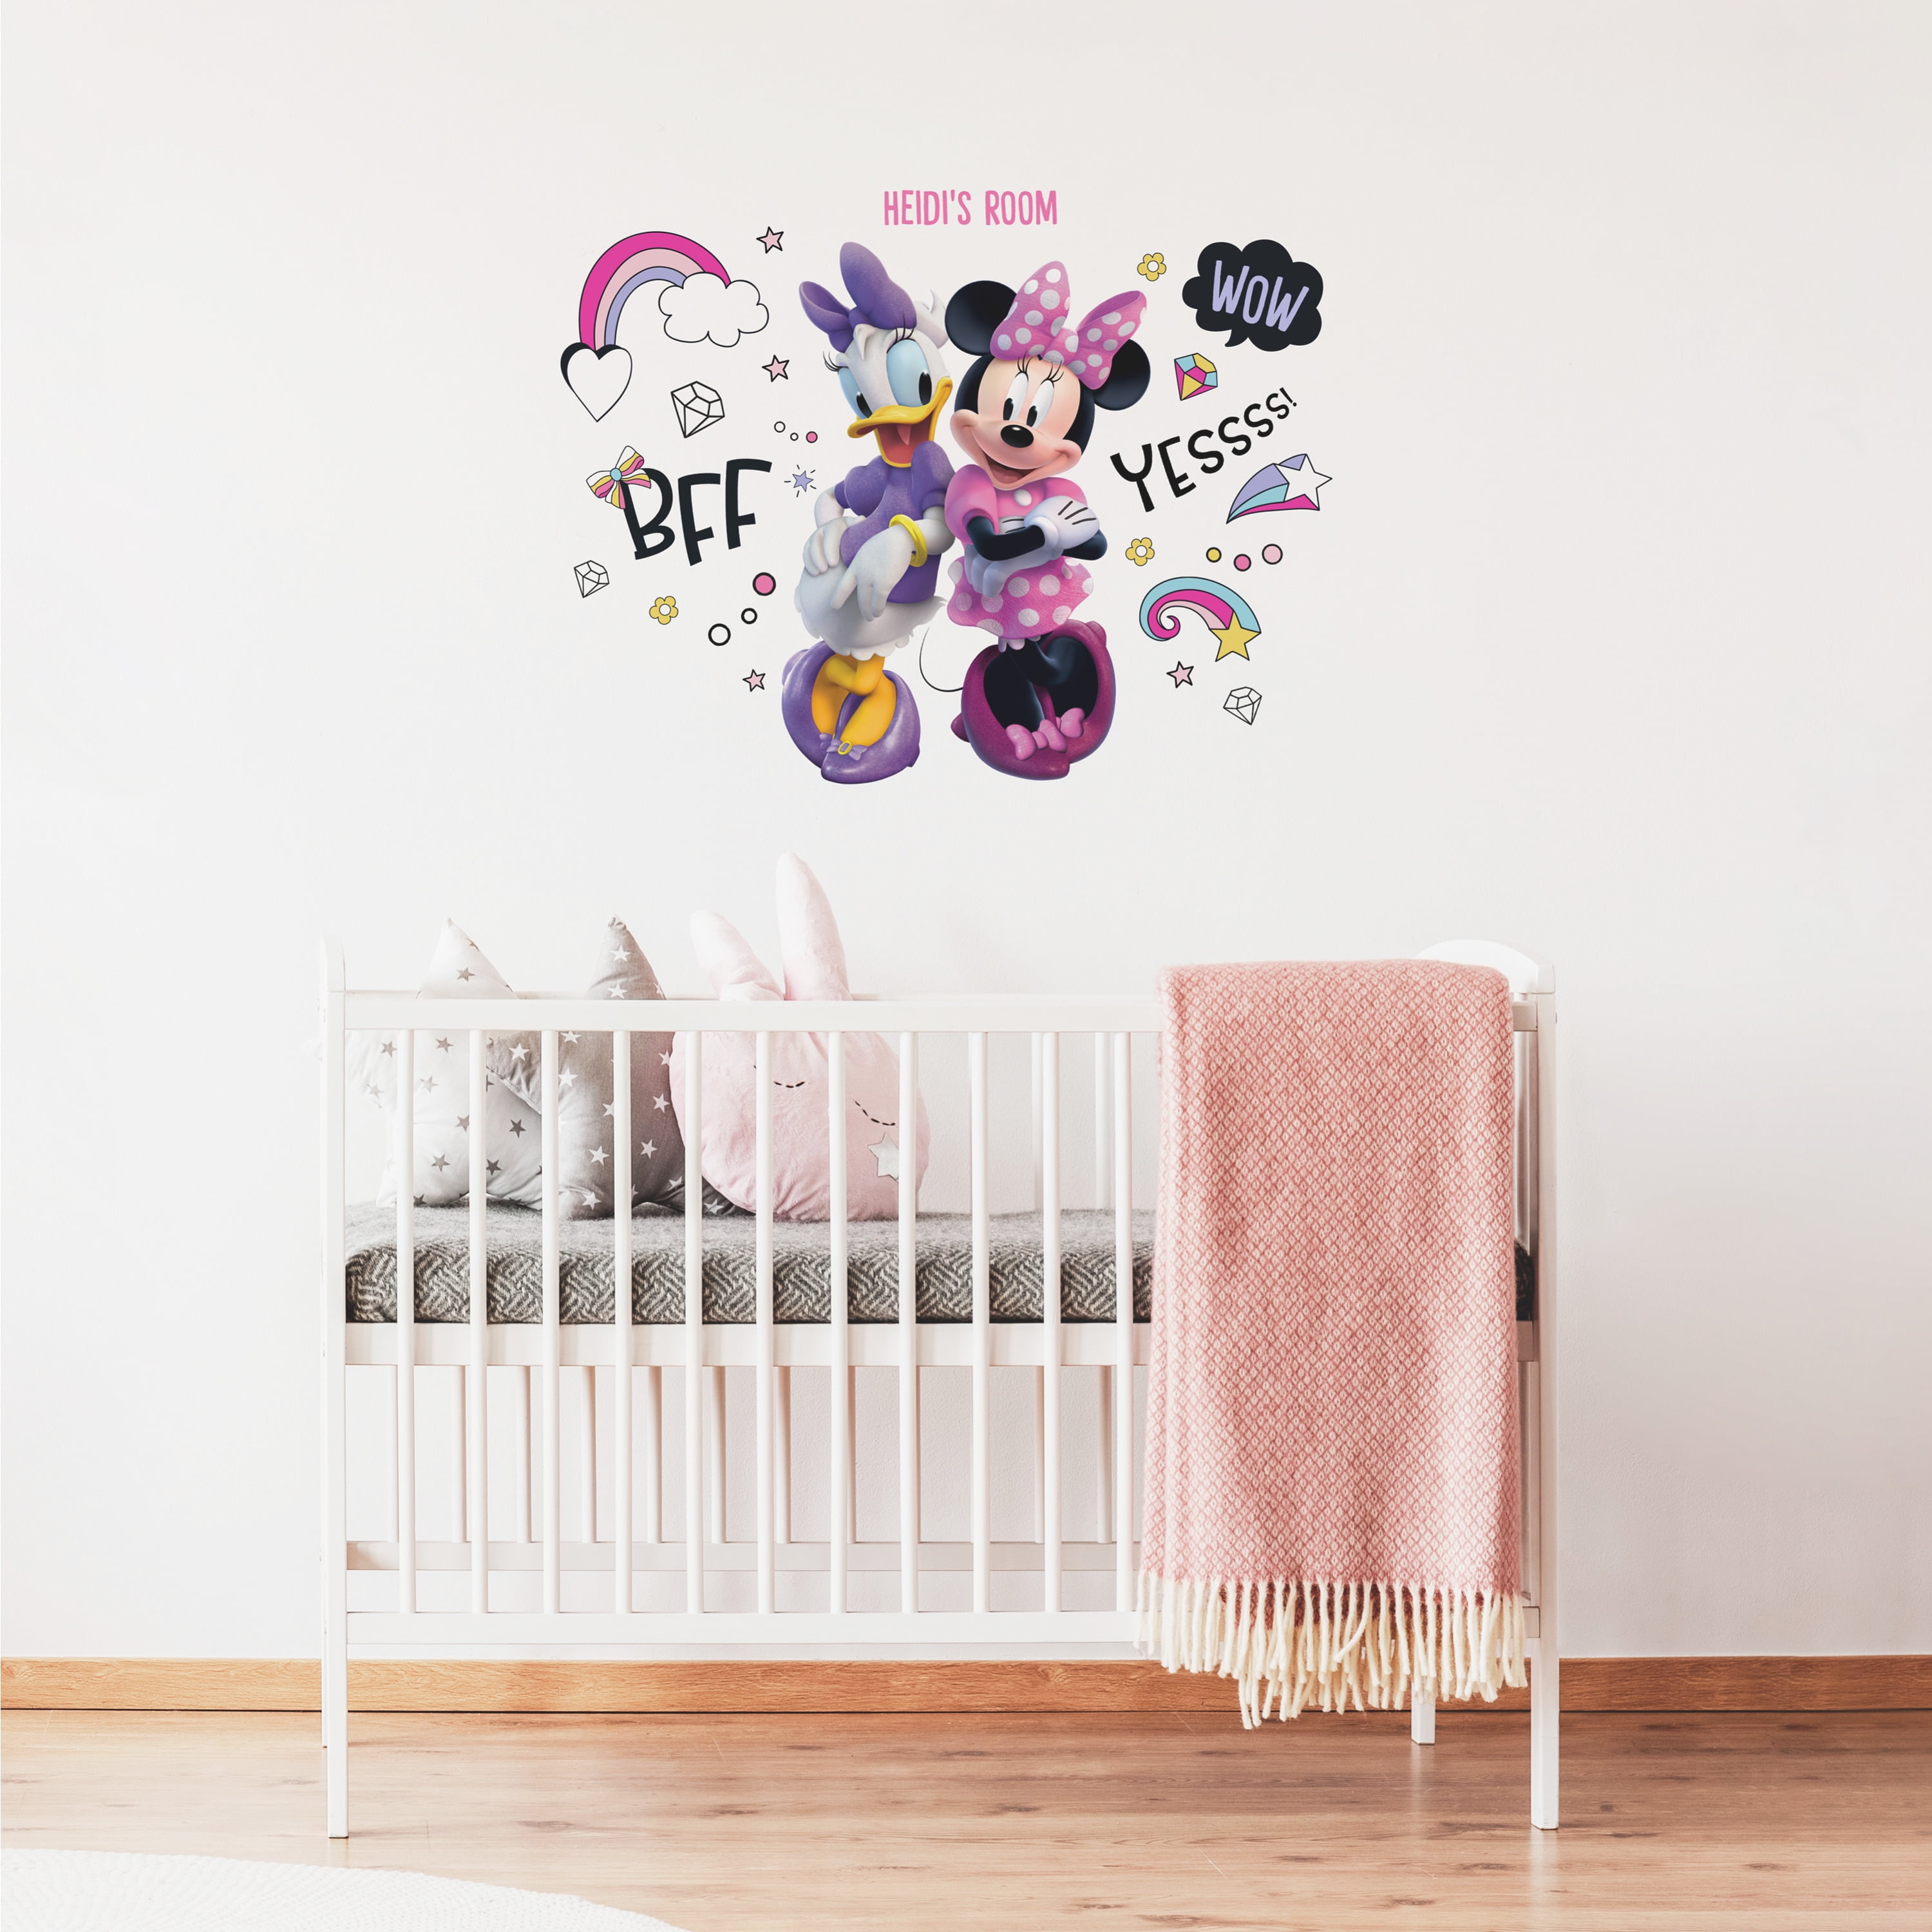 Beautiful Minnie Mouse Custom Wall Sticker Manufacturer Supplier from Delhi  India